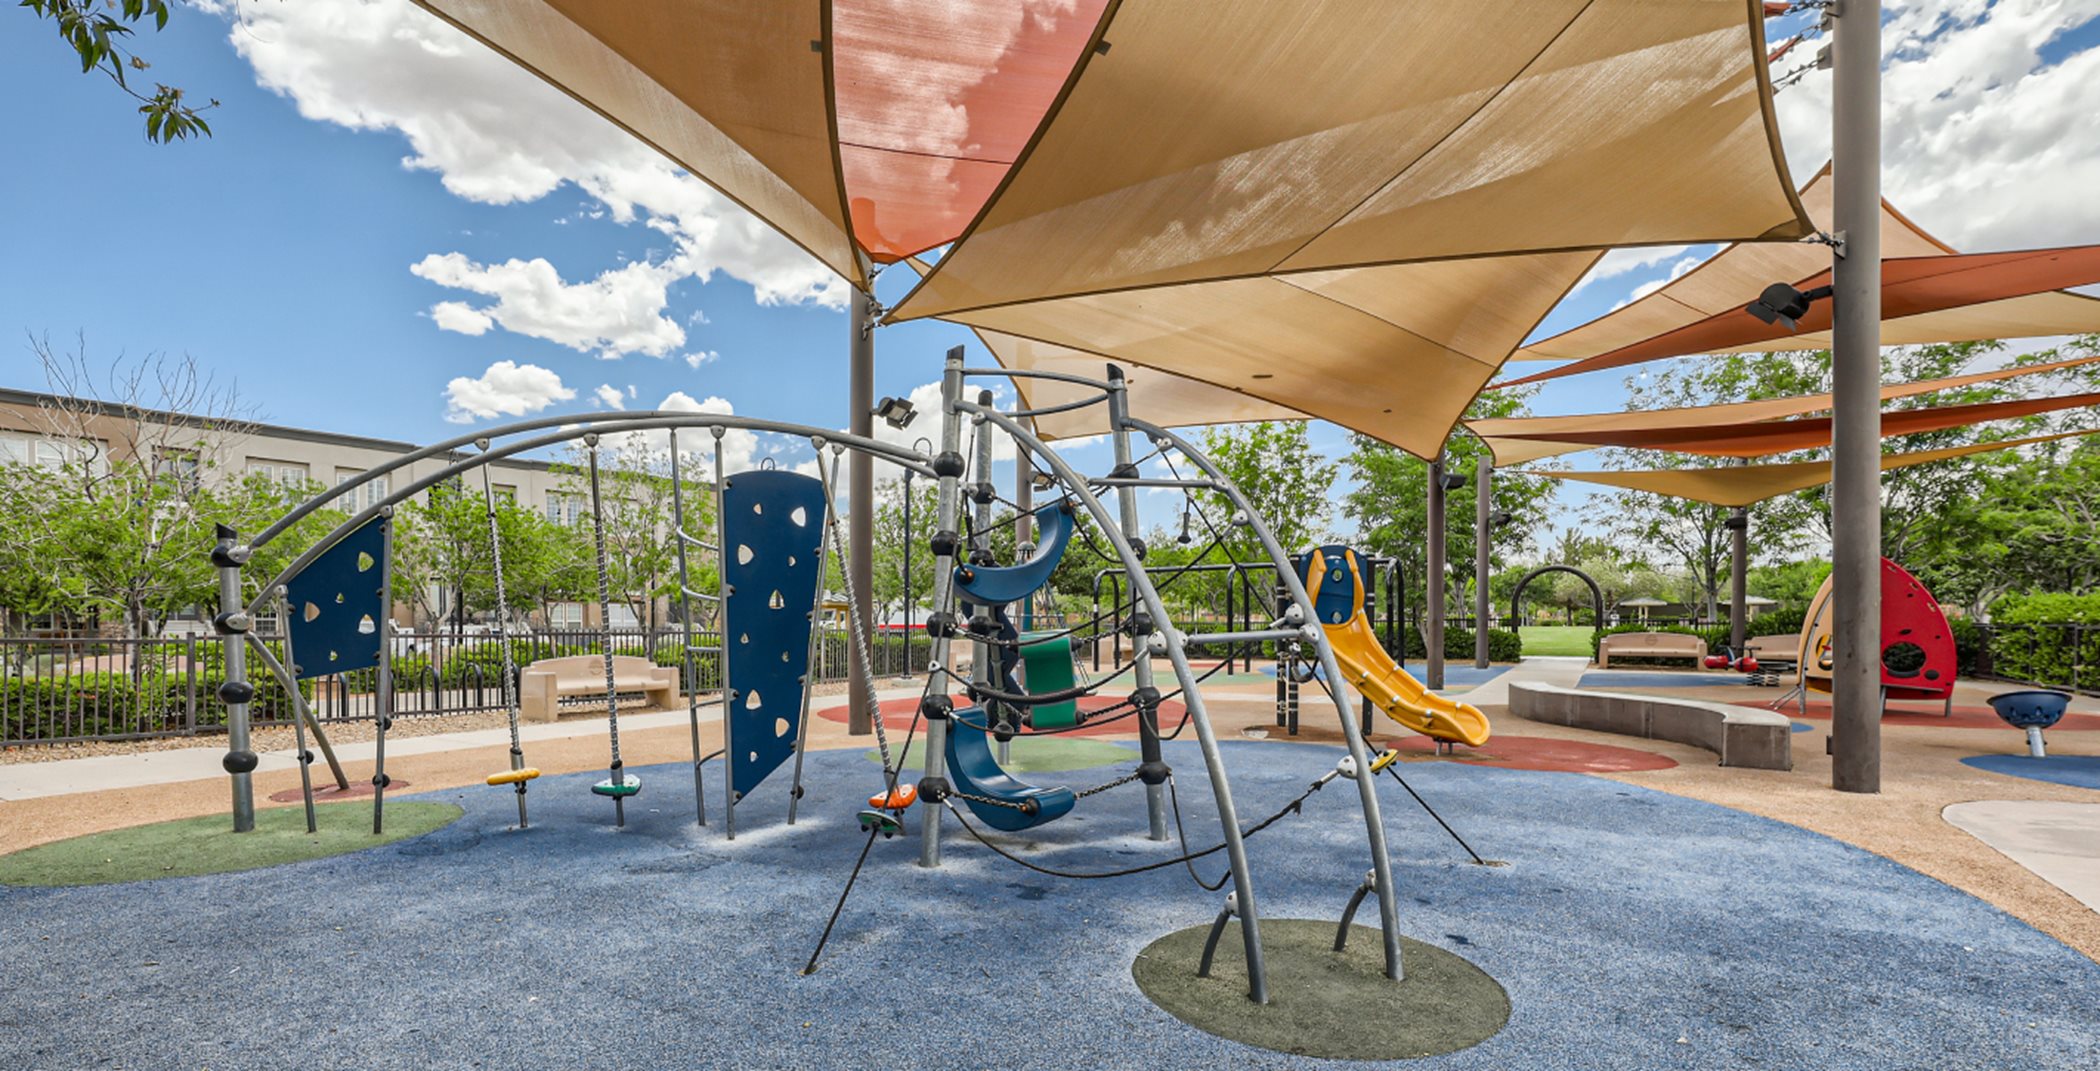 Solista Park shaded play structure